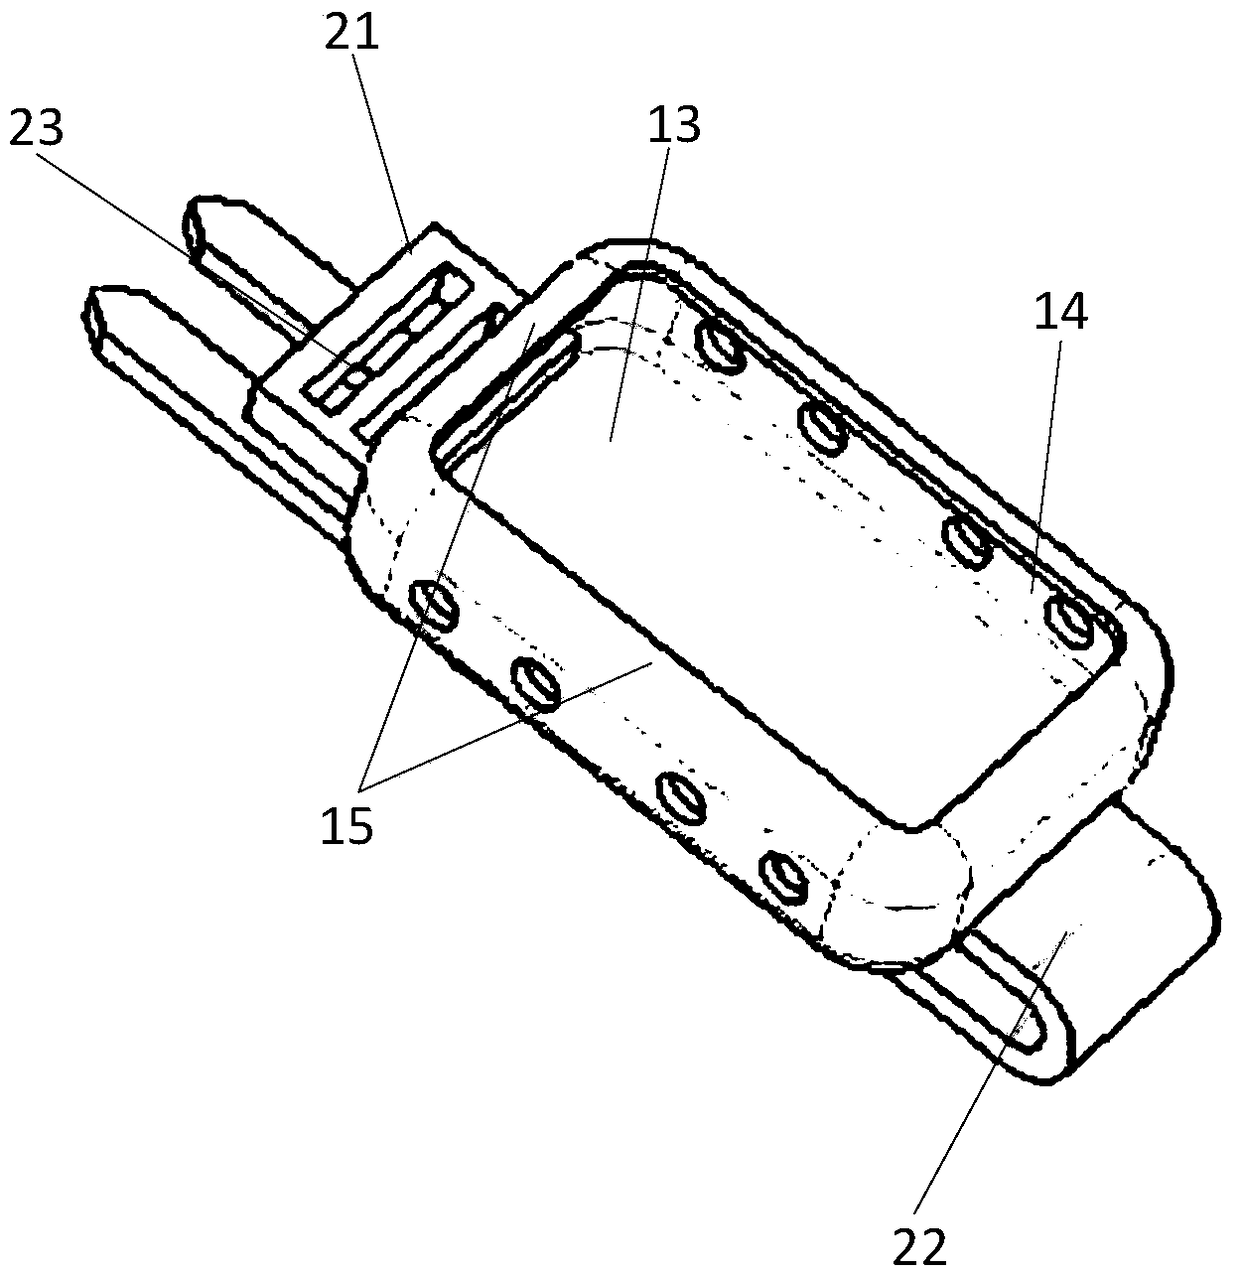 Mosquito repelling device and watch device